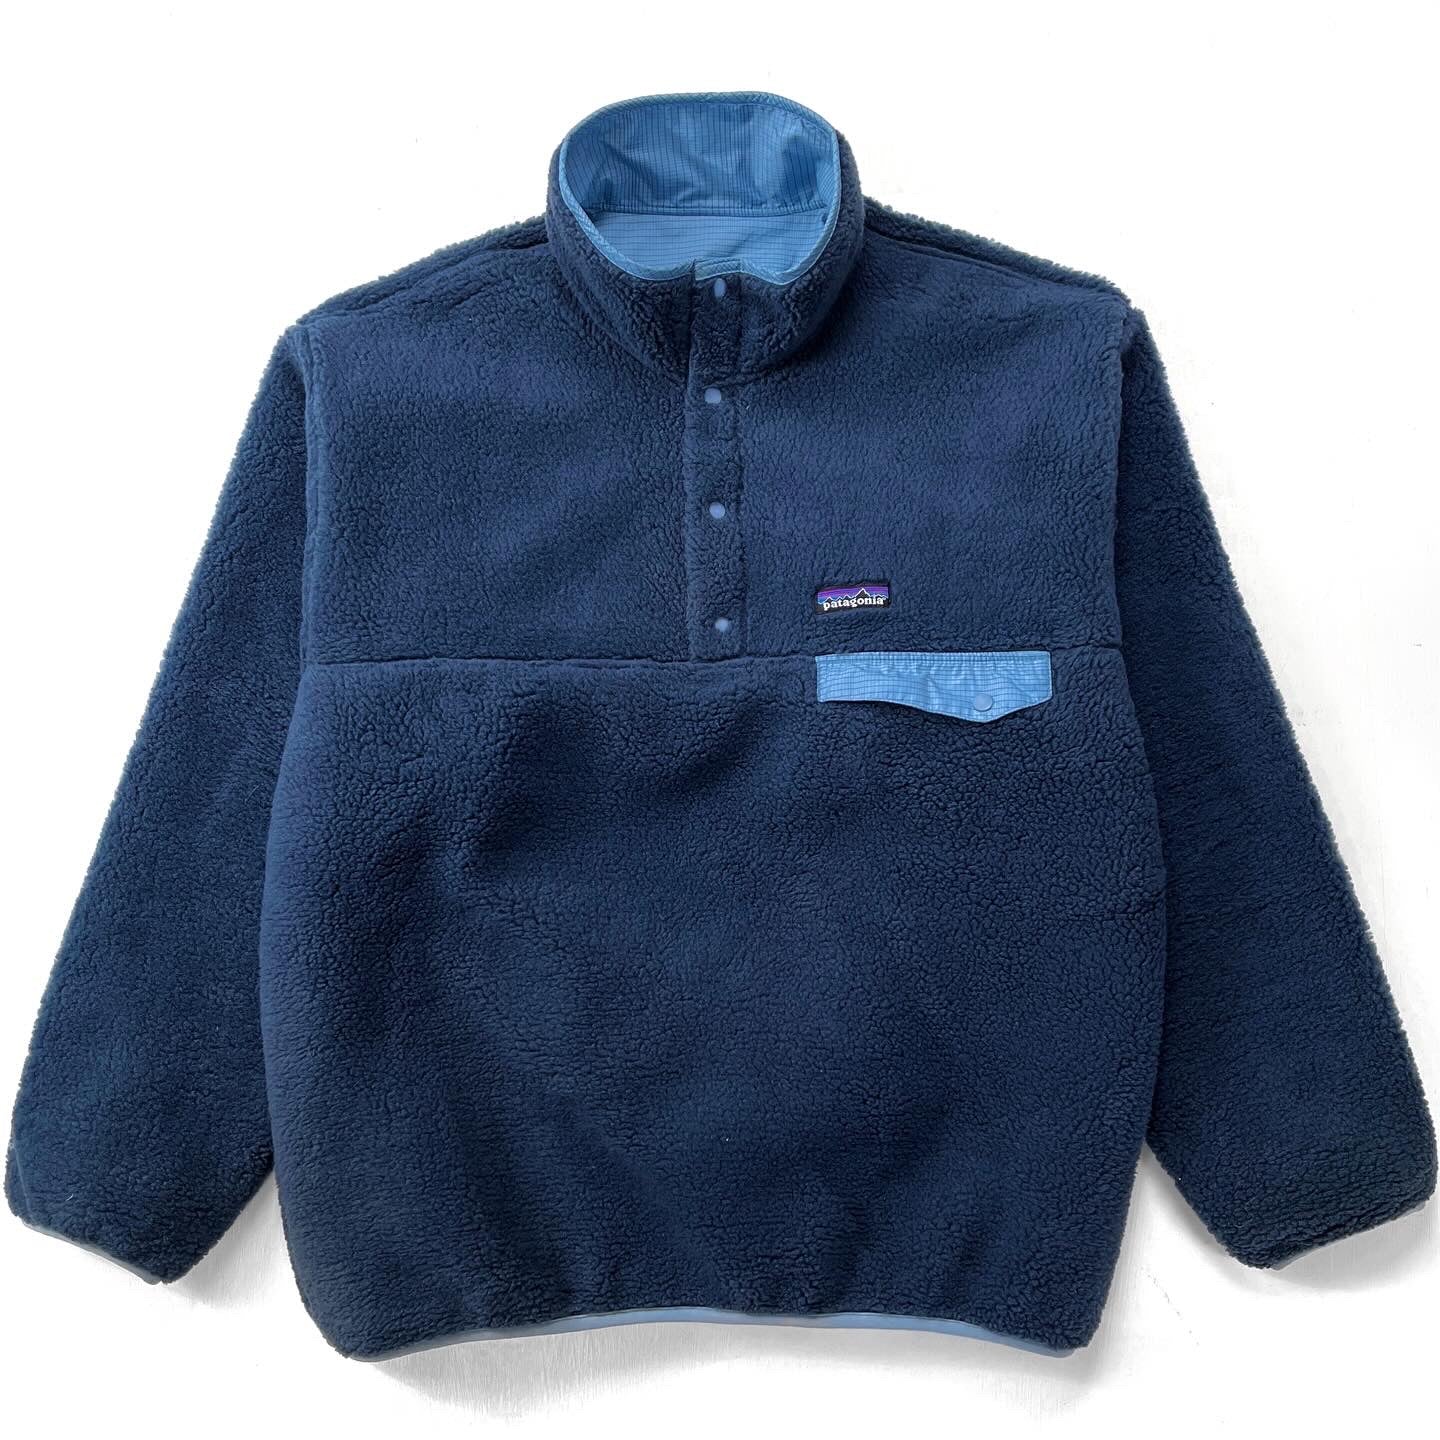 2007 Patagonia Reversible Deep Pile Snap-T Pullover, Chalk Blue (L)